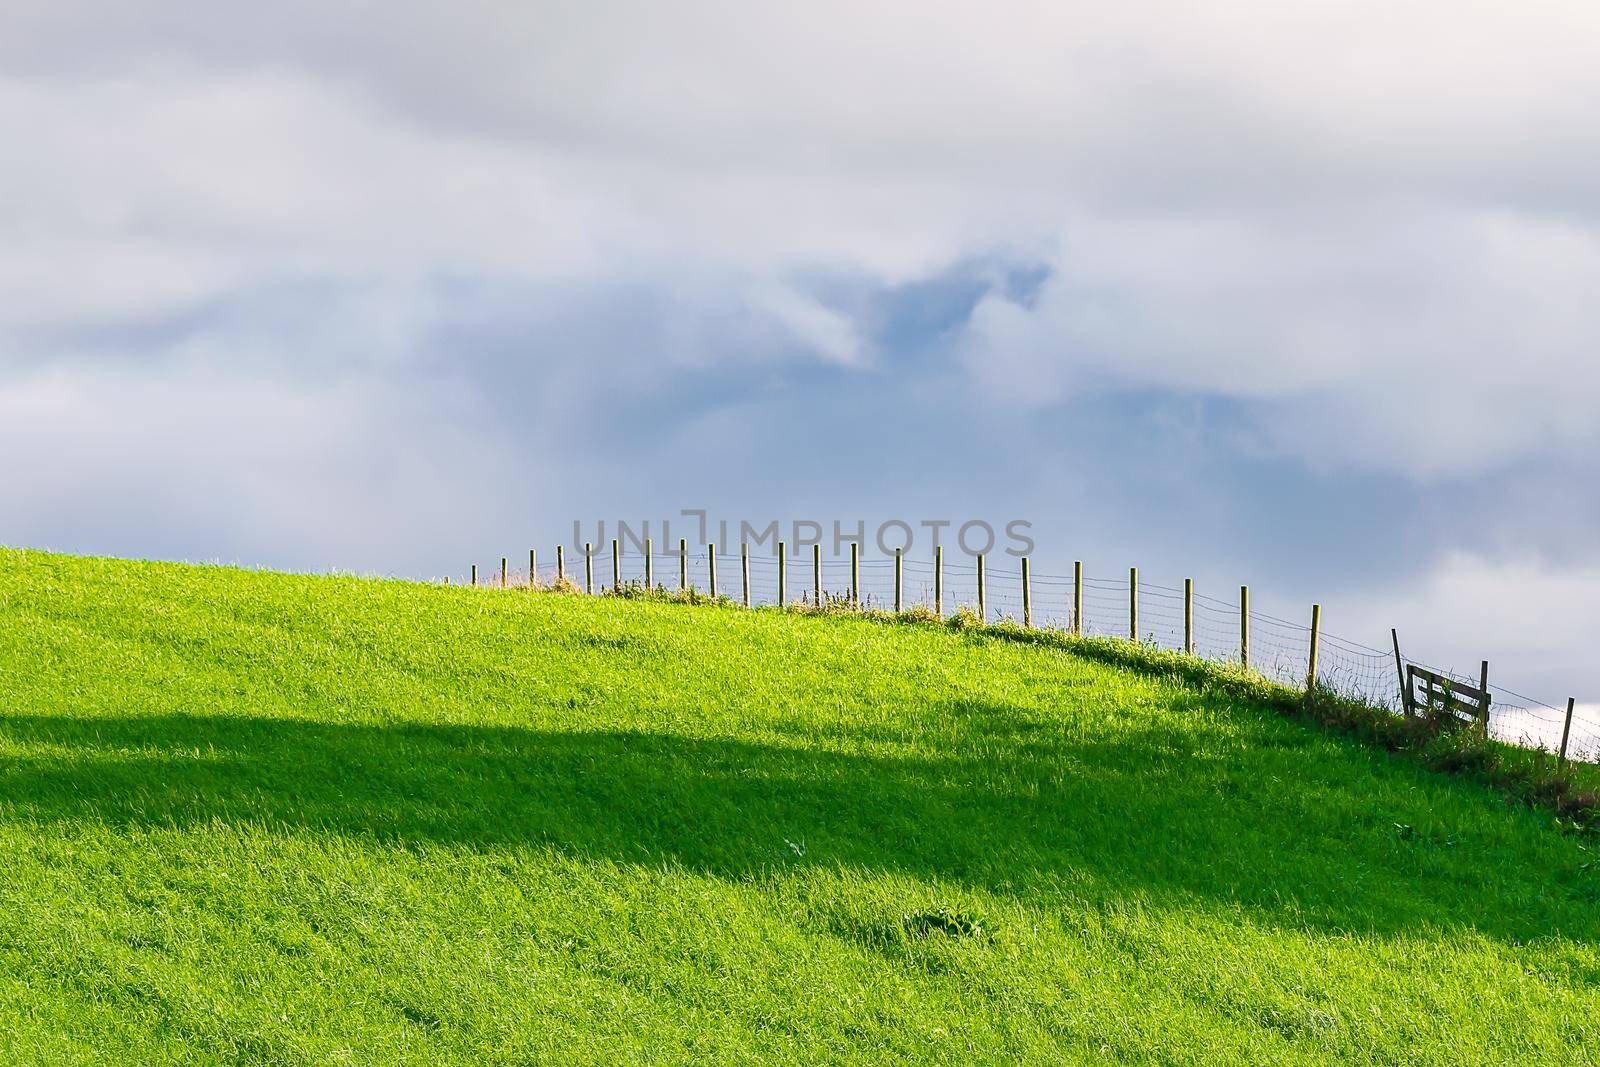 Green fields and fences